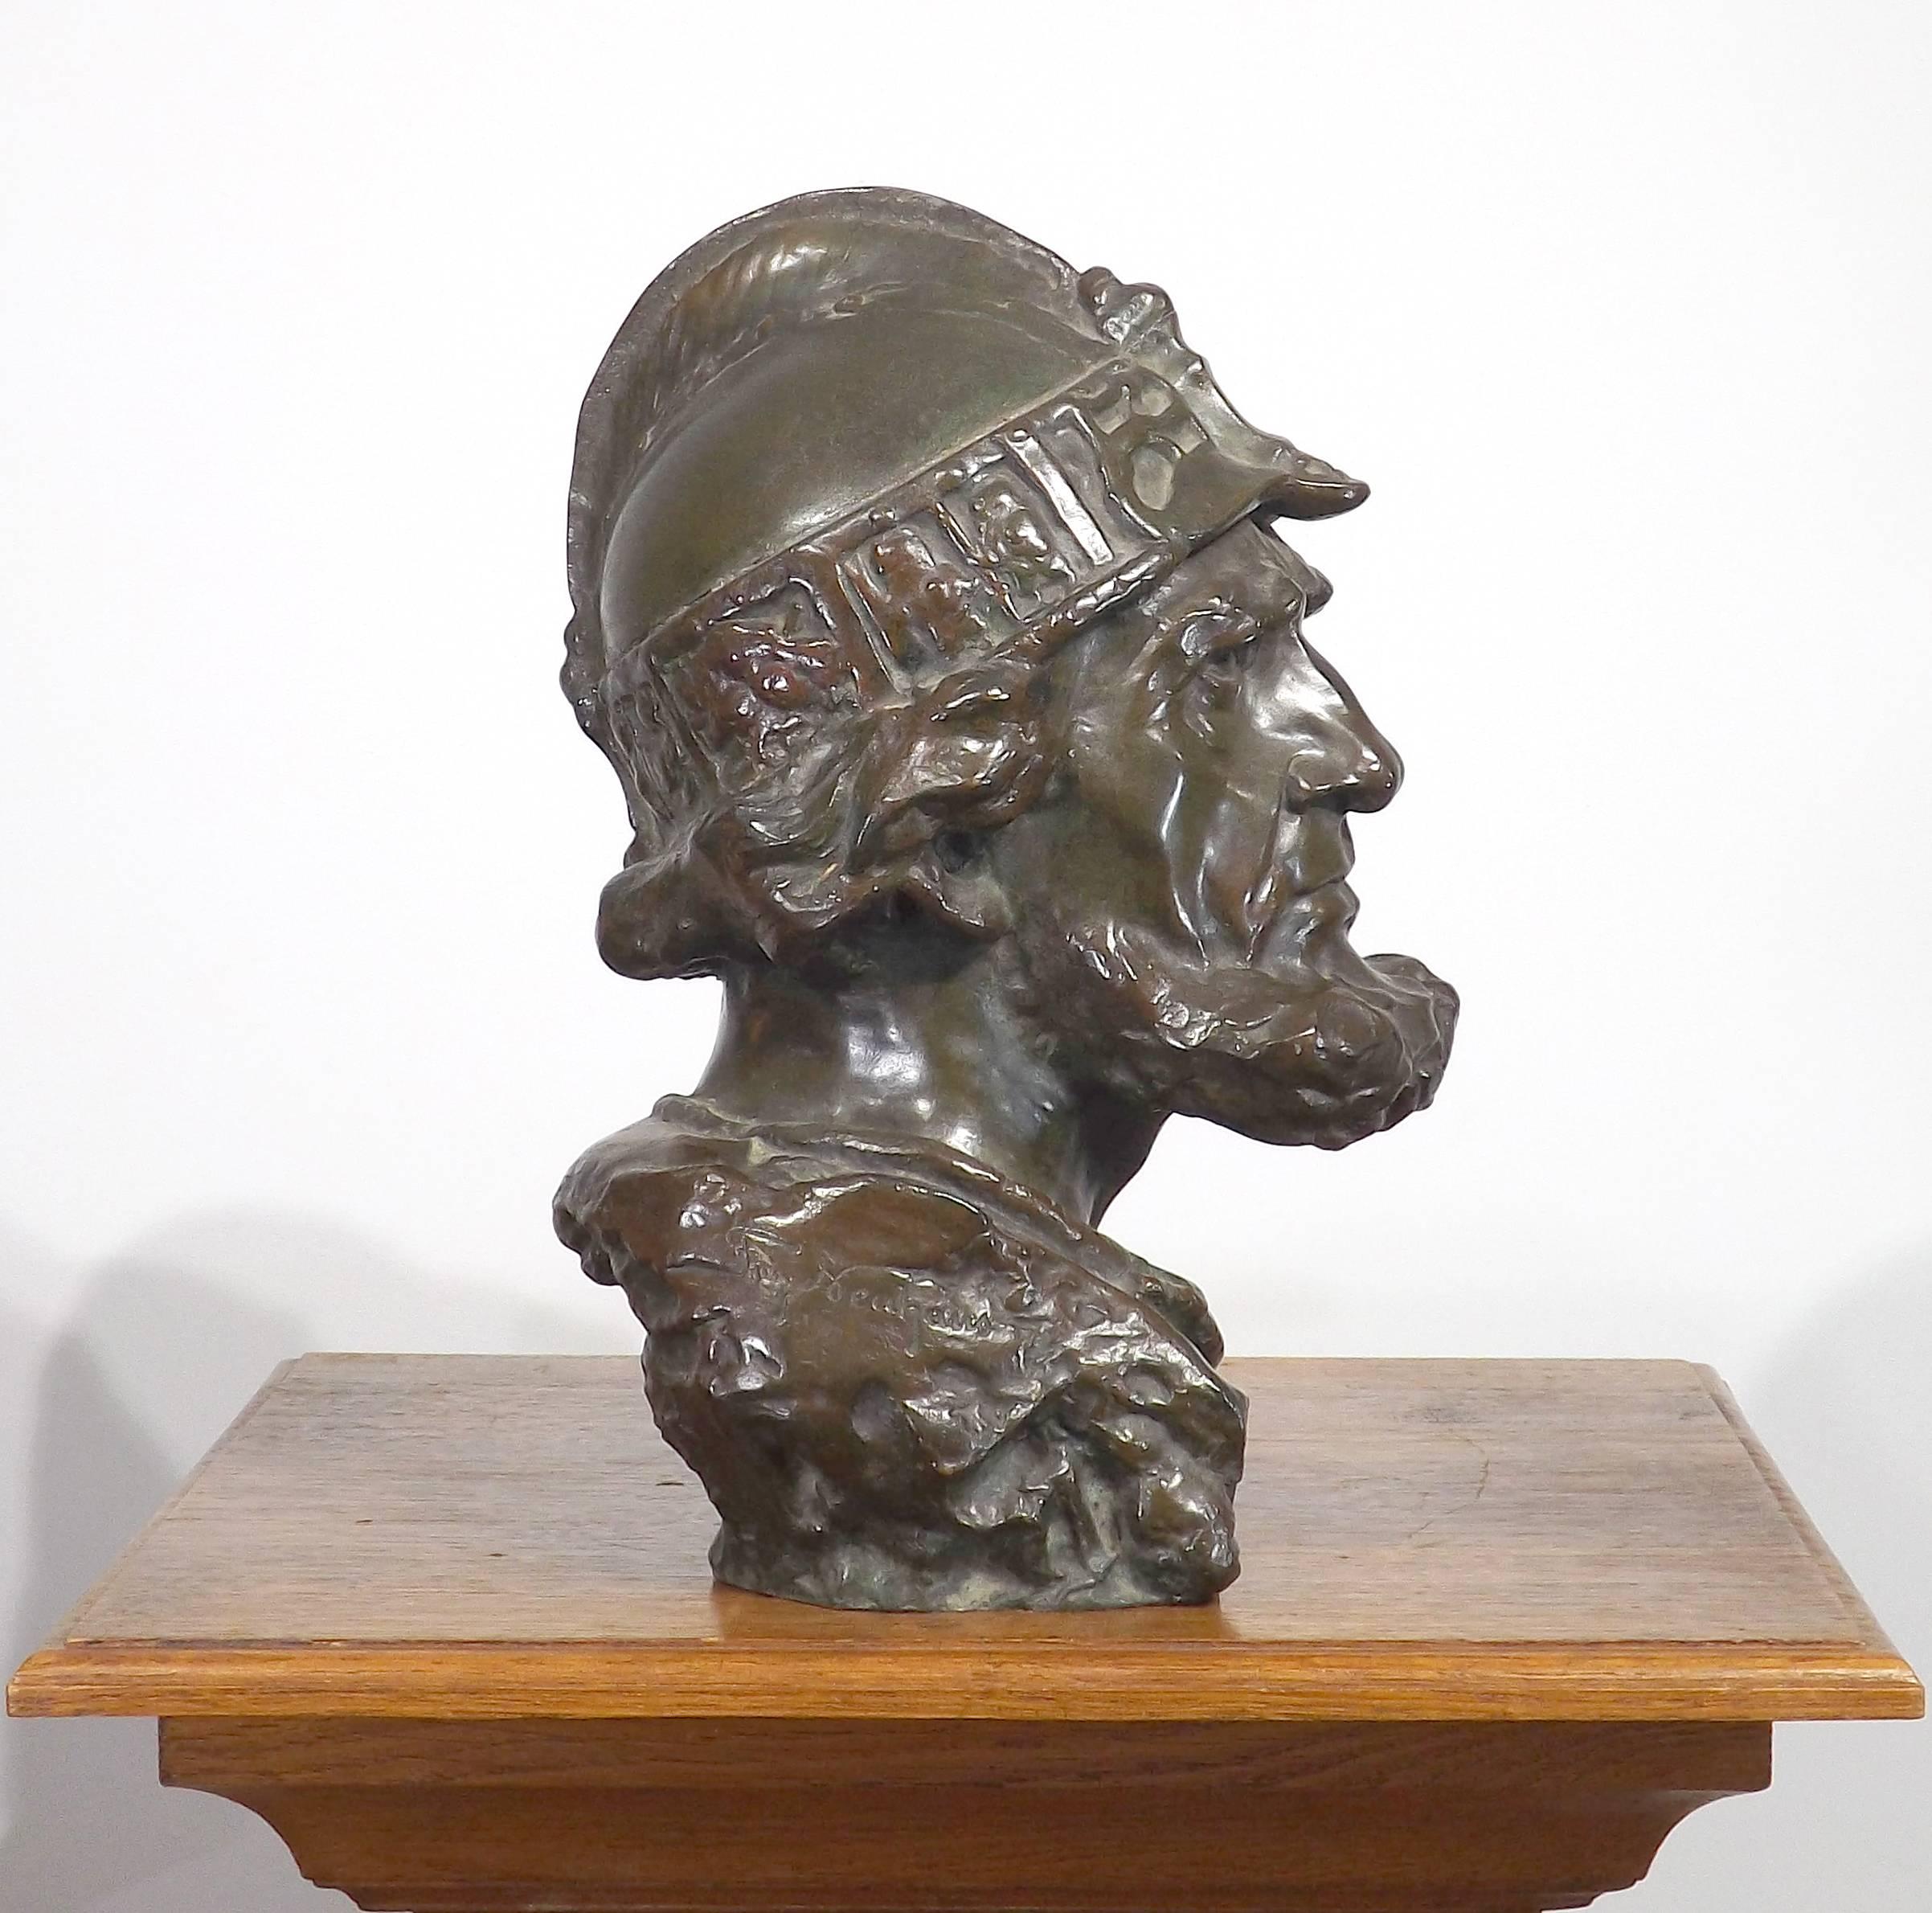 Viking bust by German artist Fritz Neuhaus (1852-1922), titled 'Wikinger' on the base.

Fritz Neuhaus was a German painter and professor of art. There is no mention of sculpting bronze, however the signature on this bronze is identical to those on